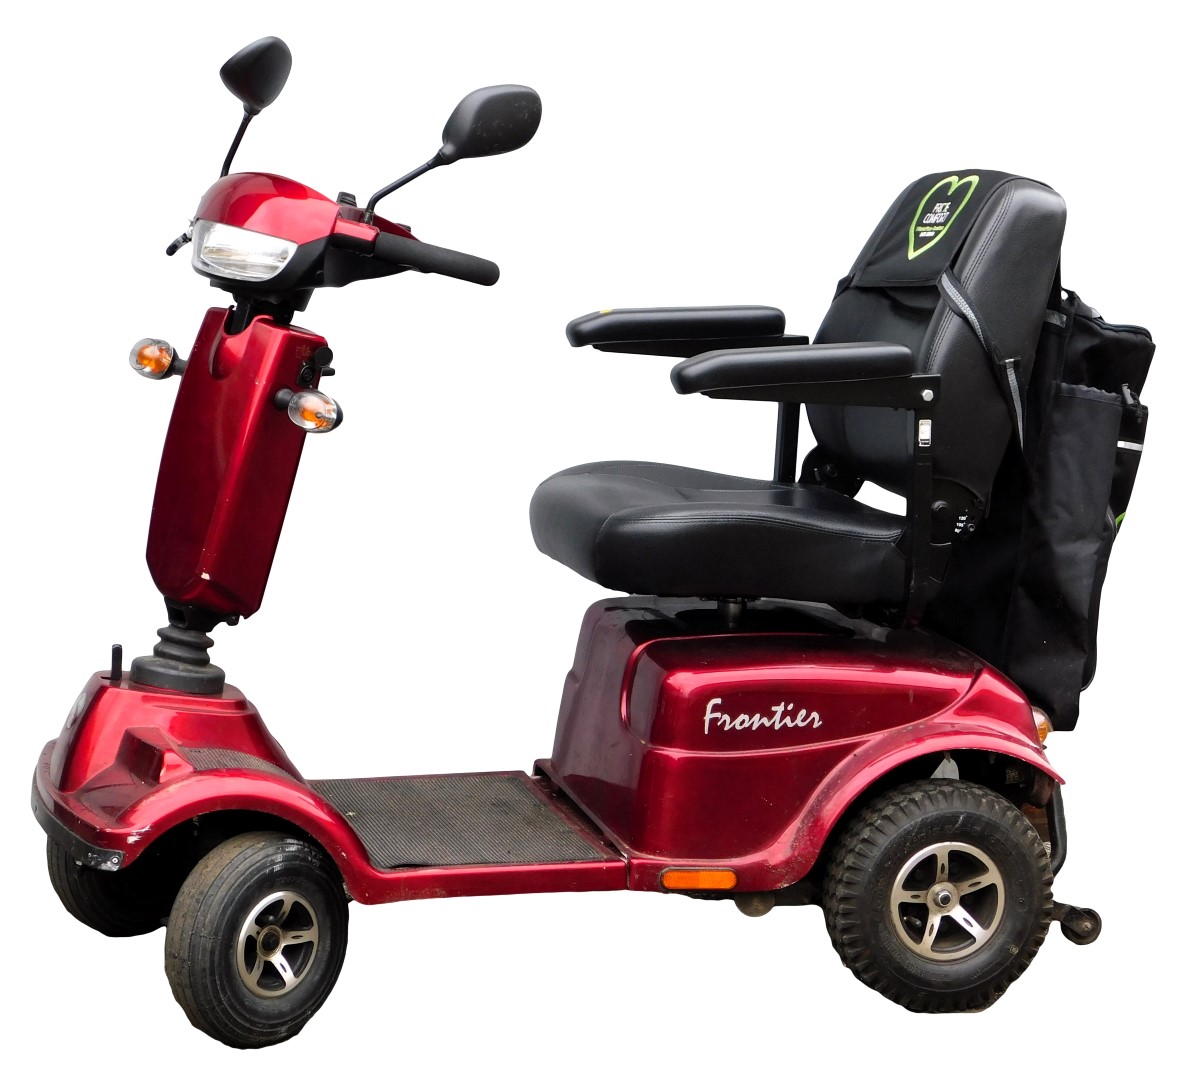 A Frontier electric mobility scooter, with red paint work, and charger.